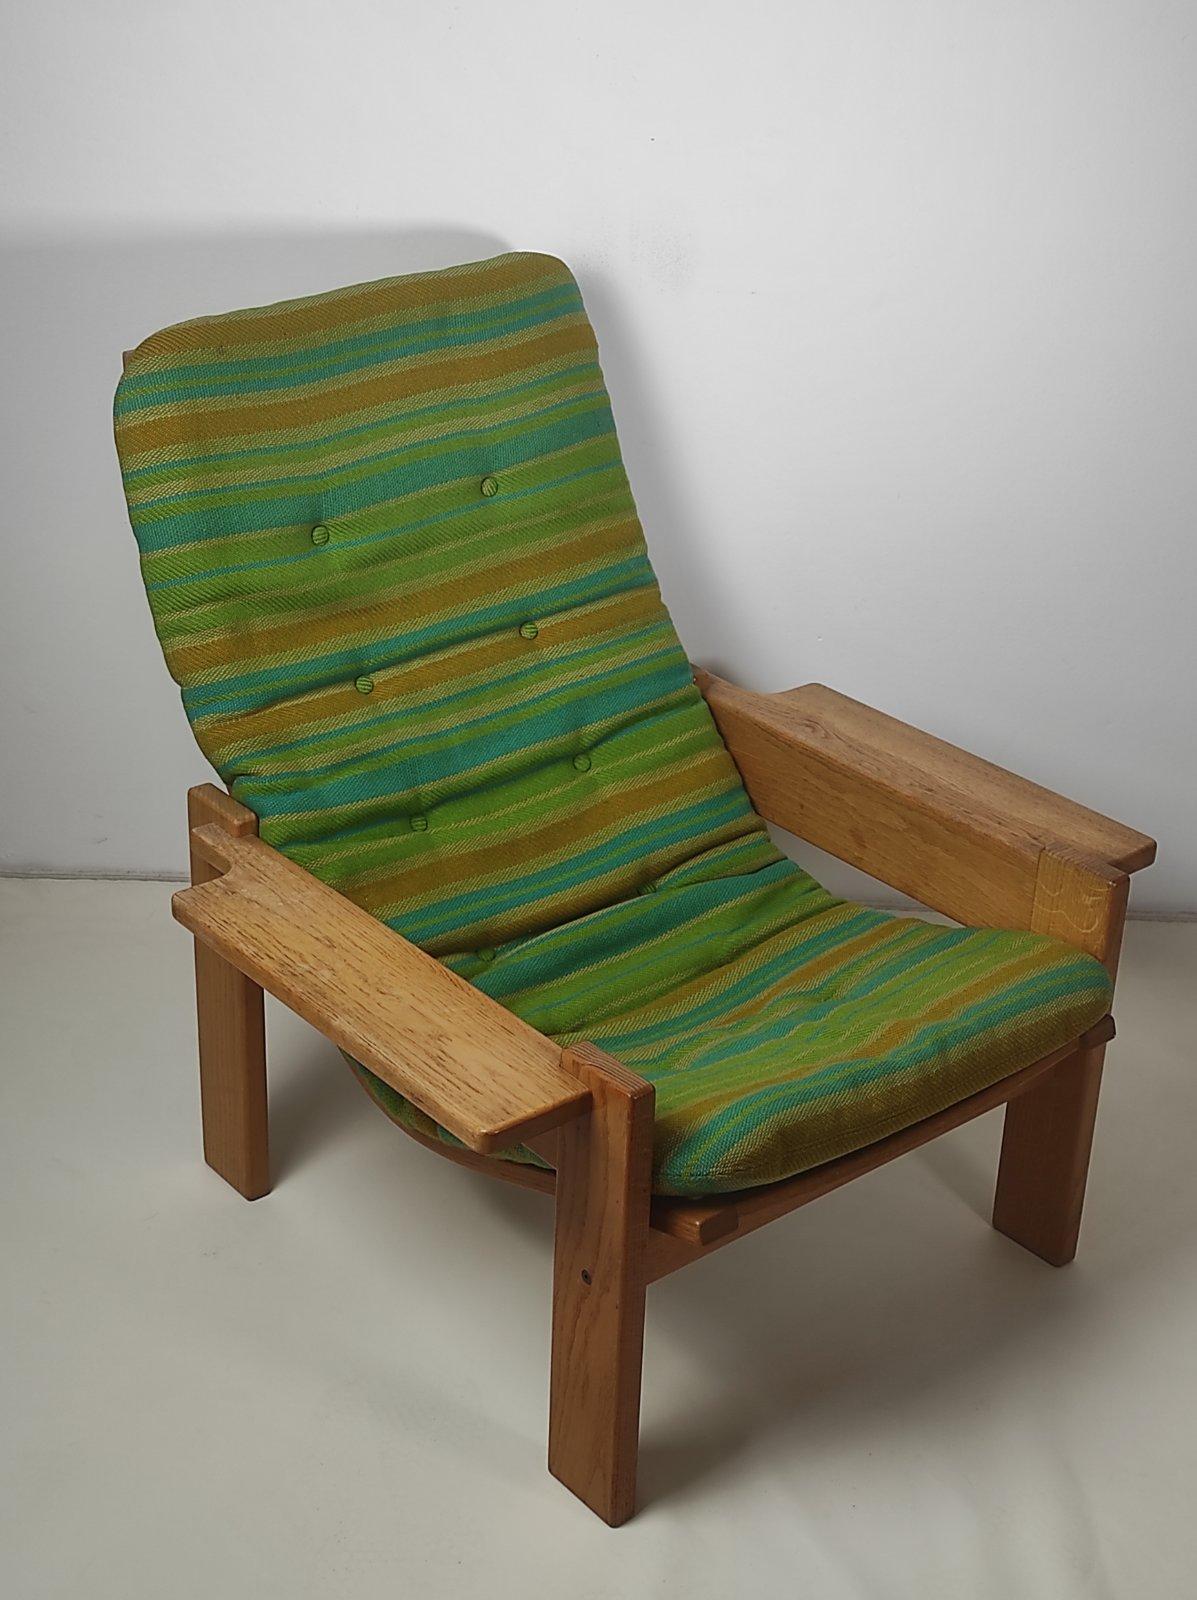 Fabric Yngve Ekstrom Longue Chair For Swedese 1960s For Sale